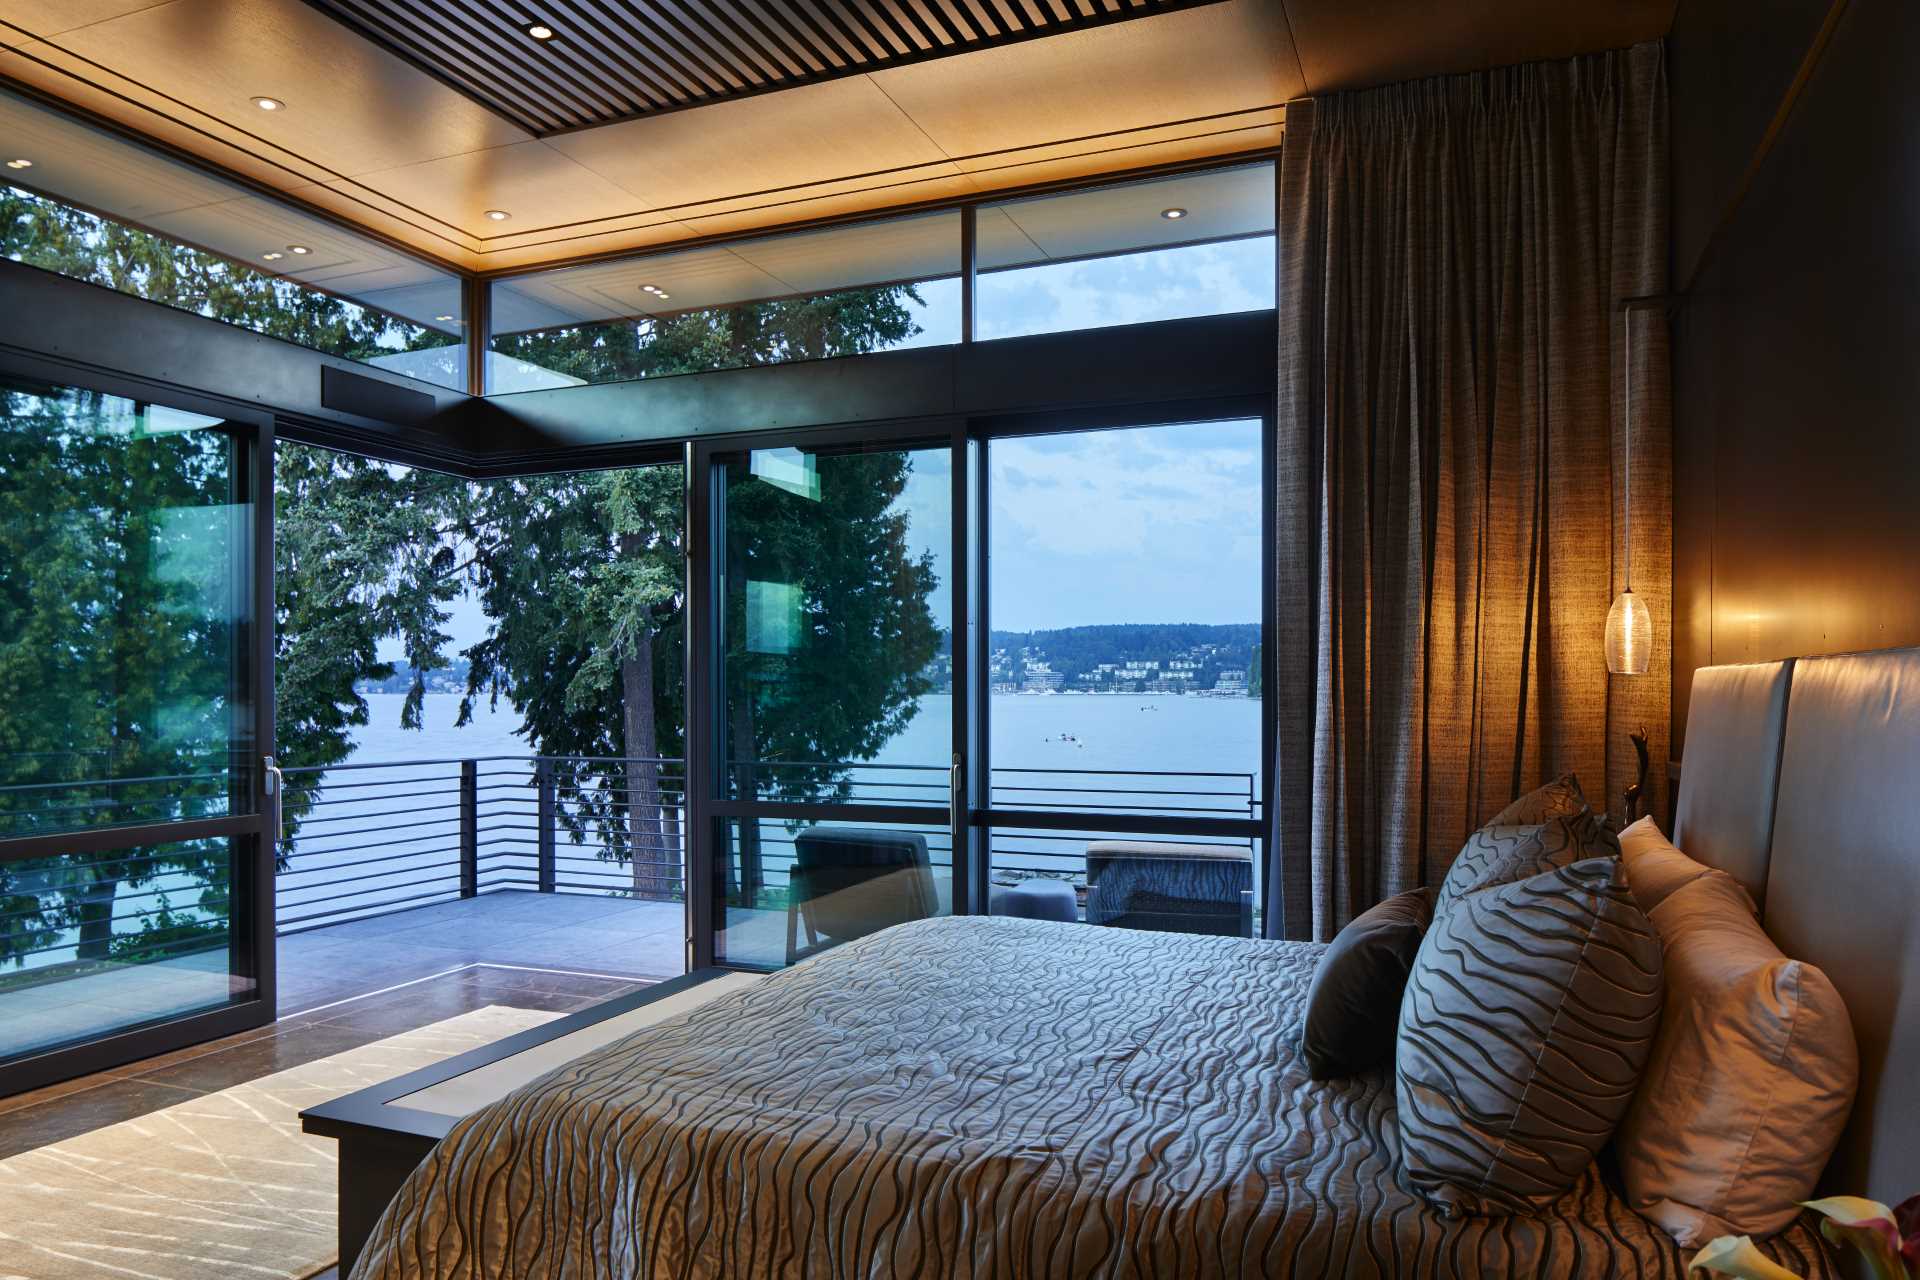 A modern bedroom with glass walls that open to a balcony.